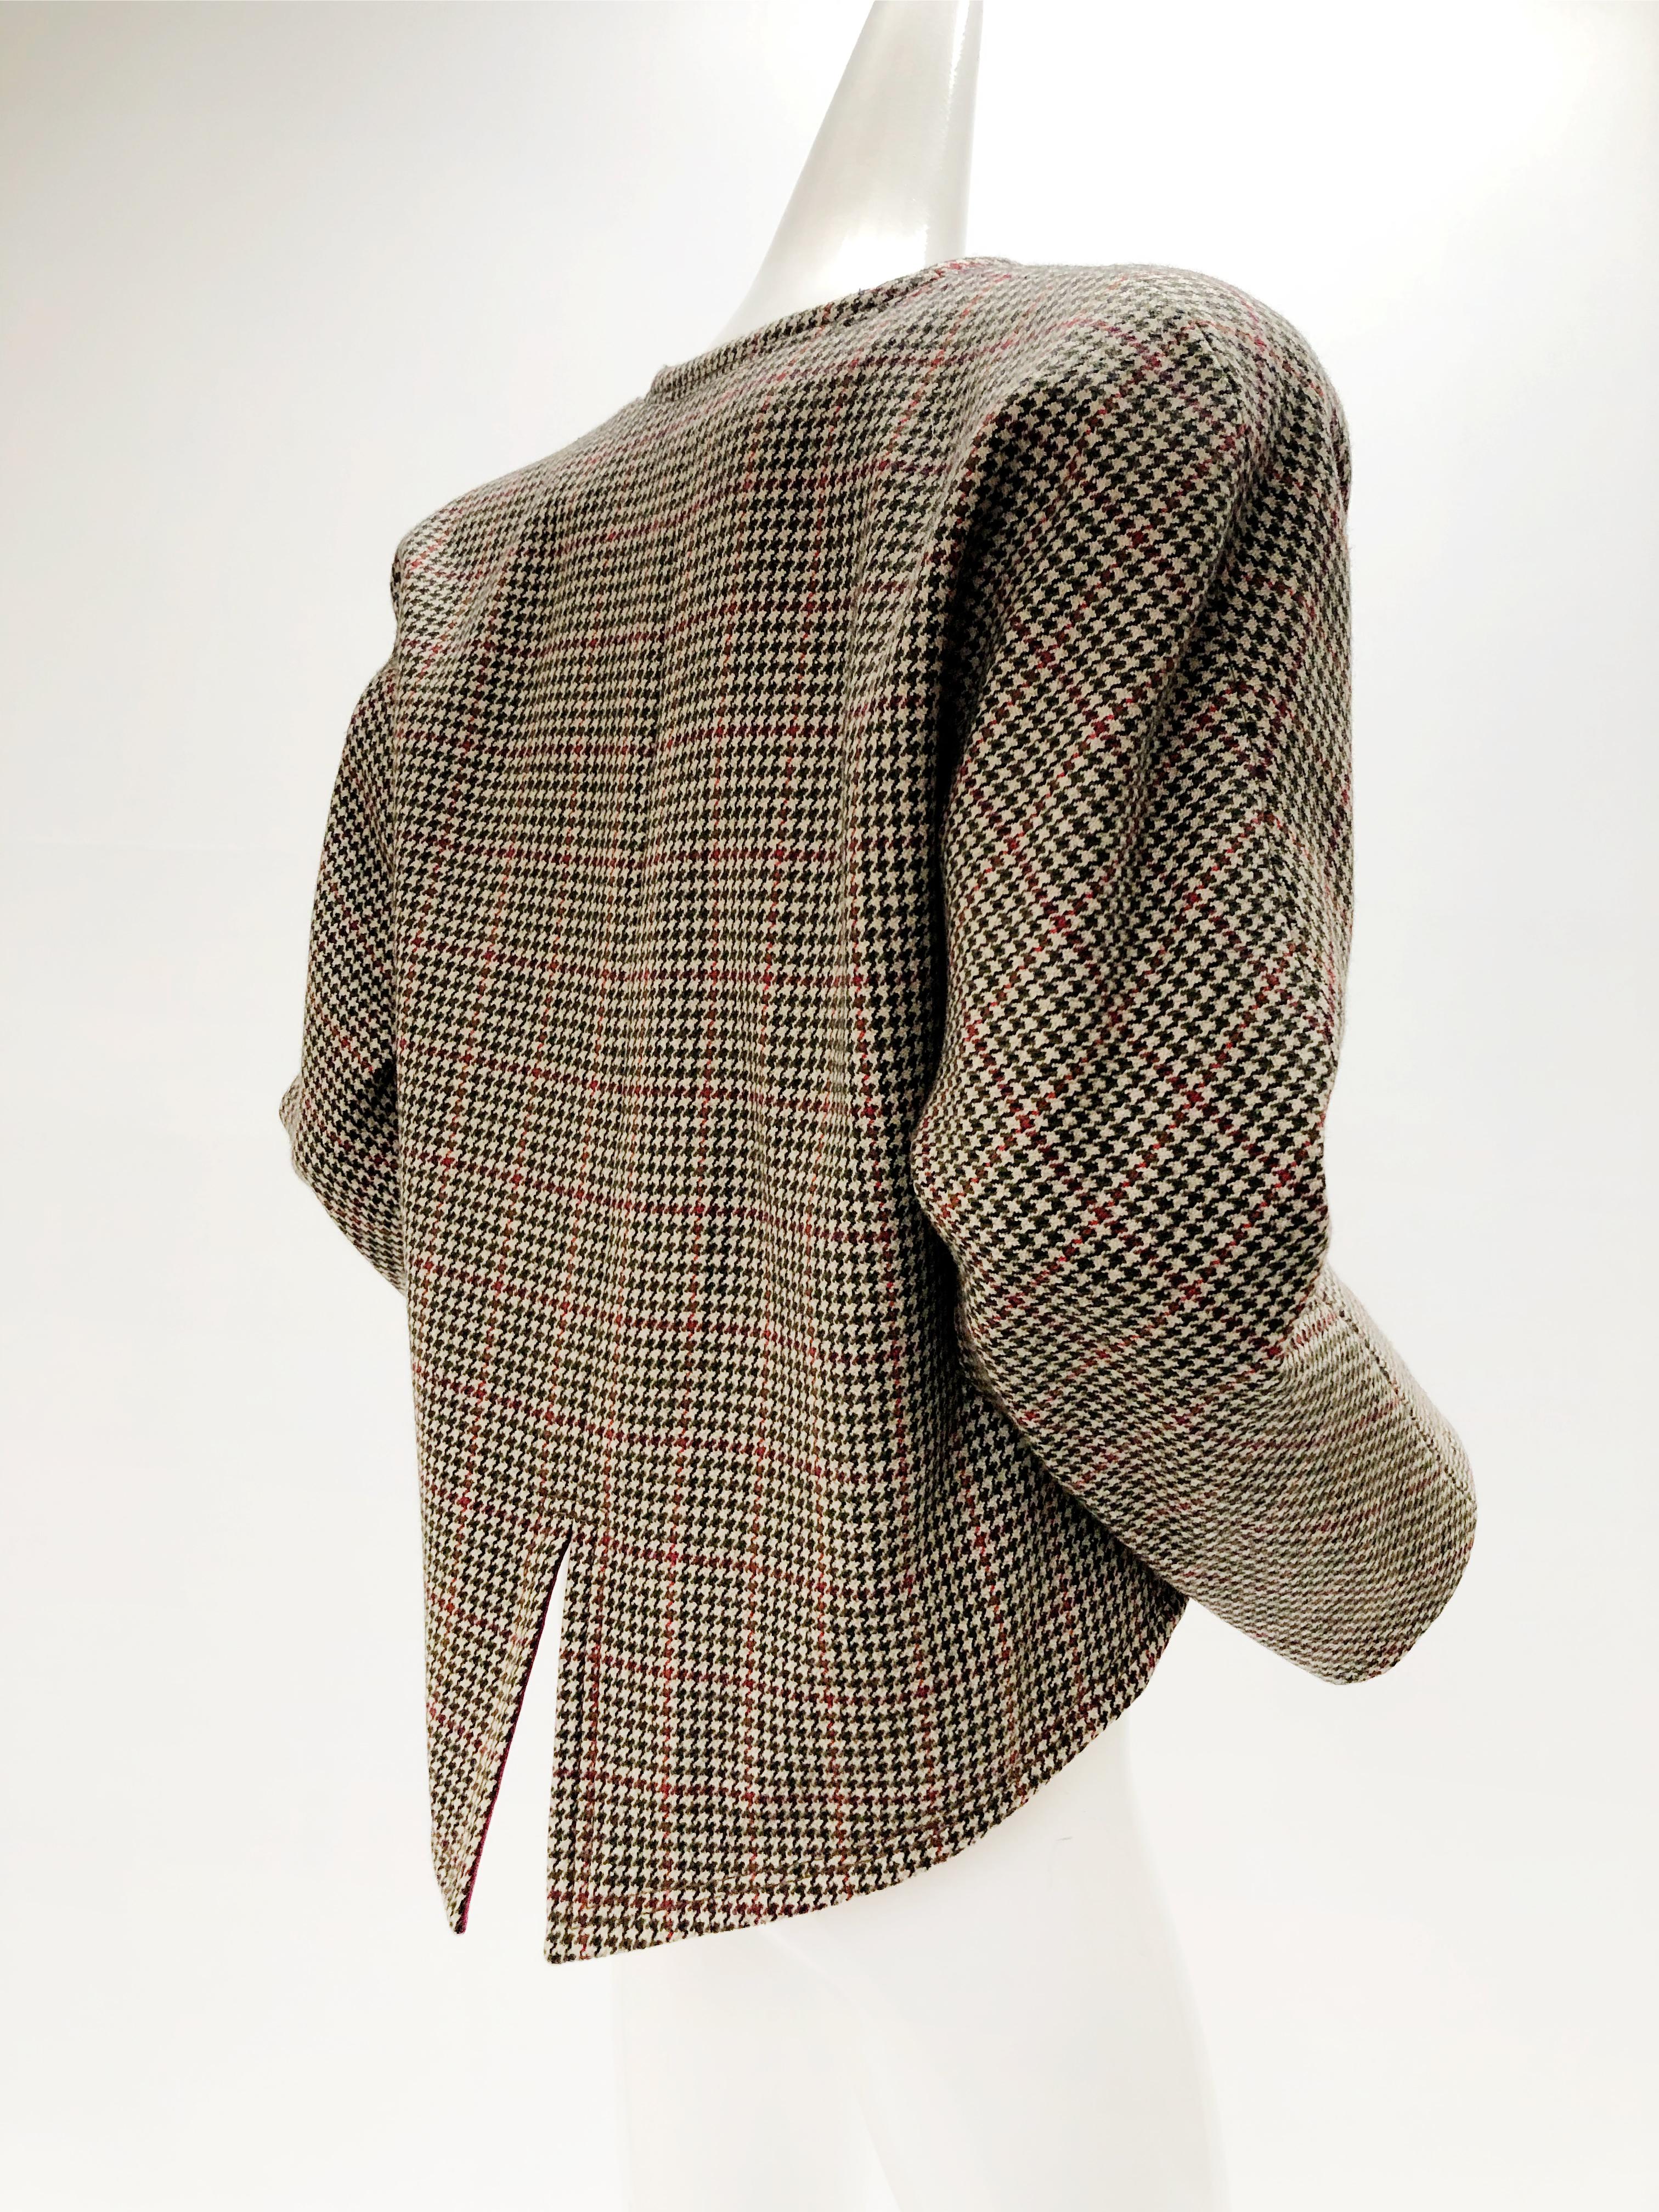 1980s Galanos Silk Dress in a Hounds Tooth Plaid W/ Matching Wool Jacket & Scarf For Sale 11